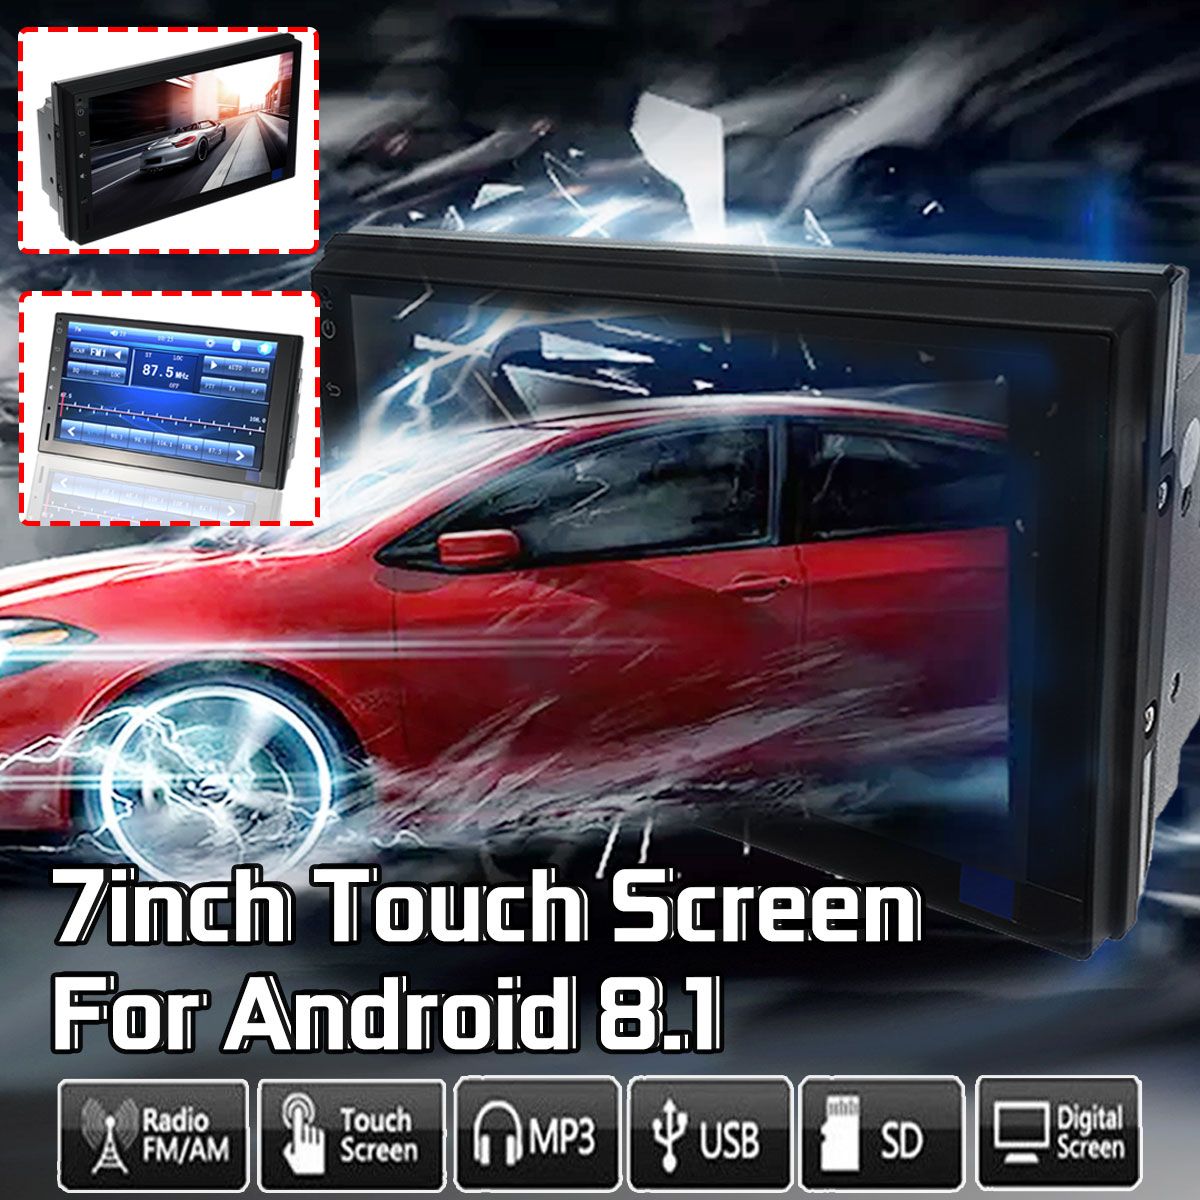 T3-7-Inch-2-DIN-for-Andriod-81-Car-Multimedia-Player-Quad-Core-1G16G-Touch-Screen-Stereo-GPS--WiFi-b-1536703